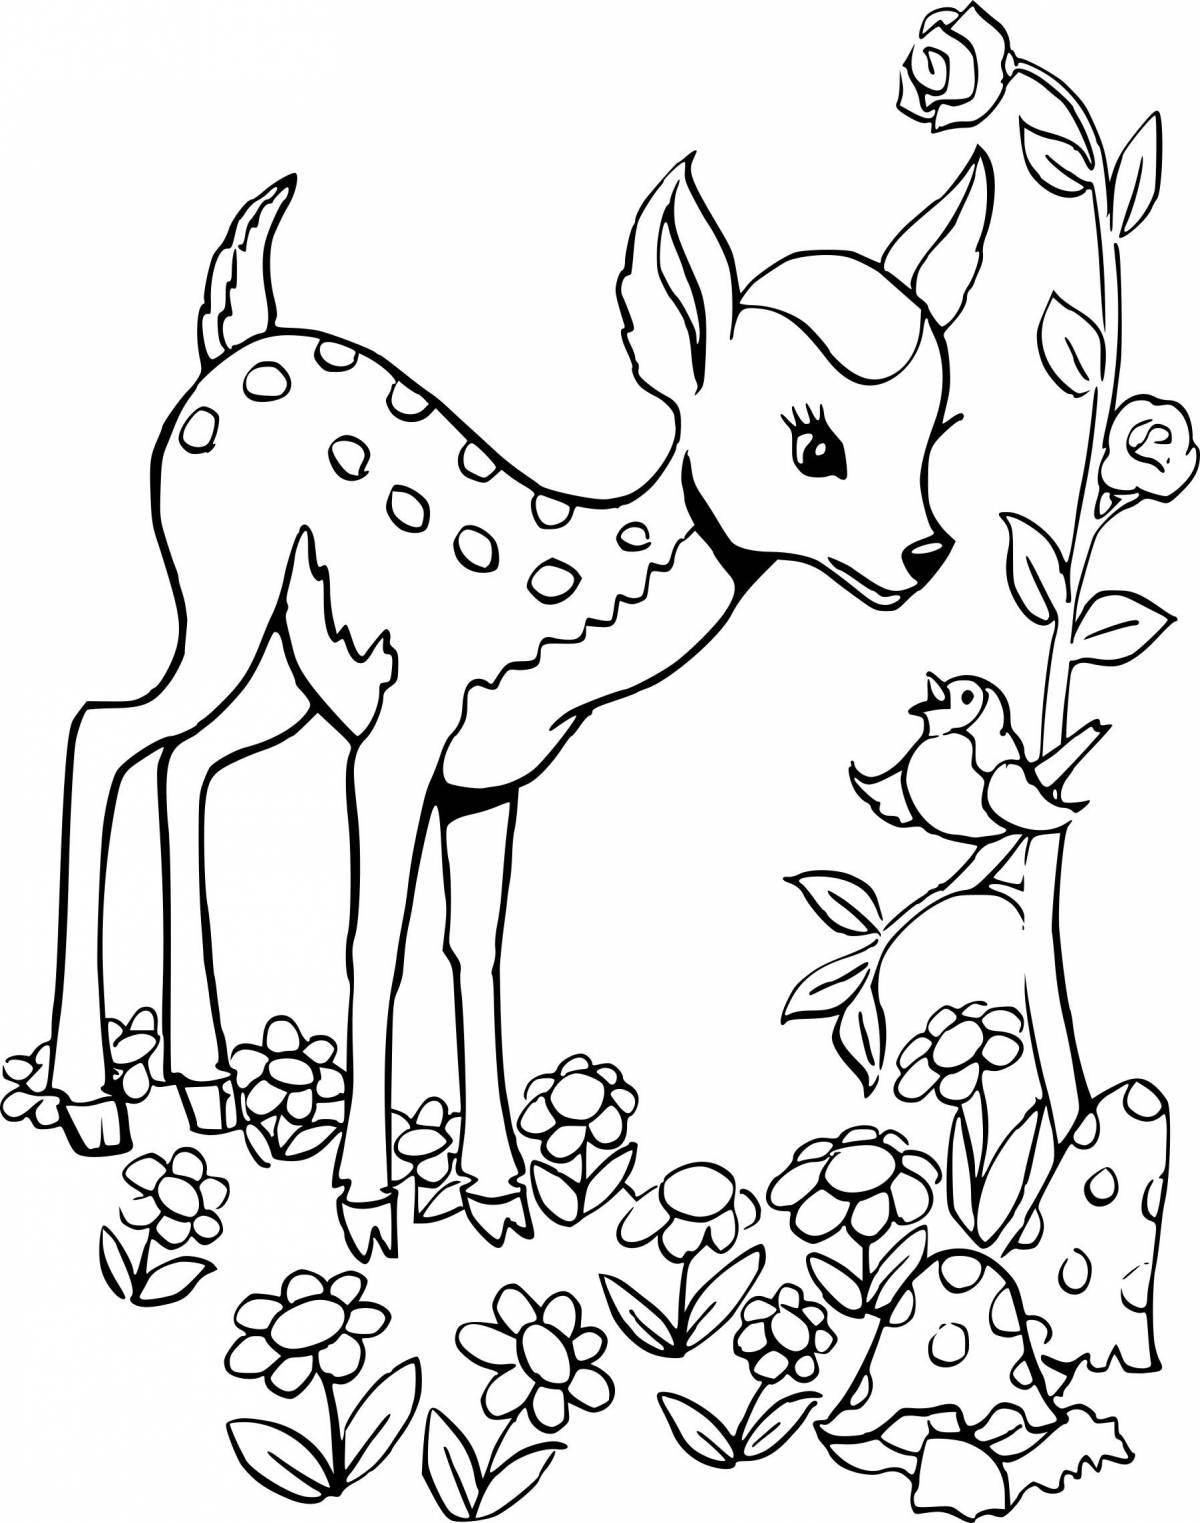 10 year old animal coloring pages